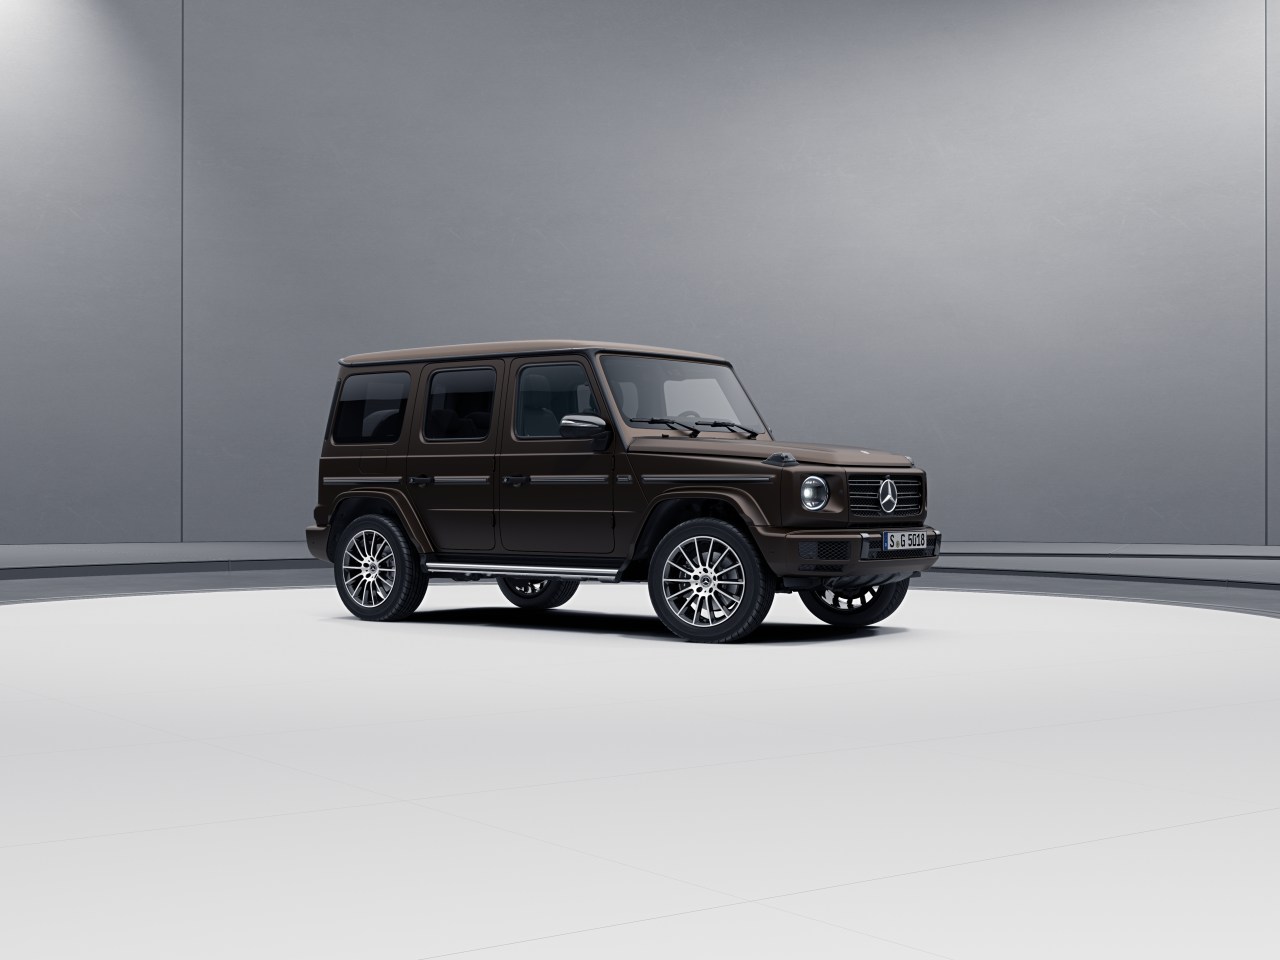 Mercedes-Benz G-Class 1:43 - G66960808 | AMG Private Lounge Store